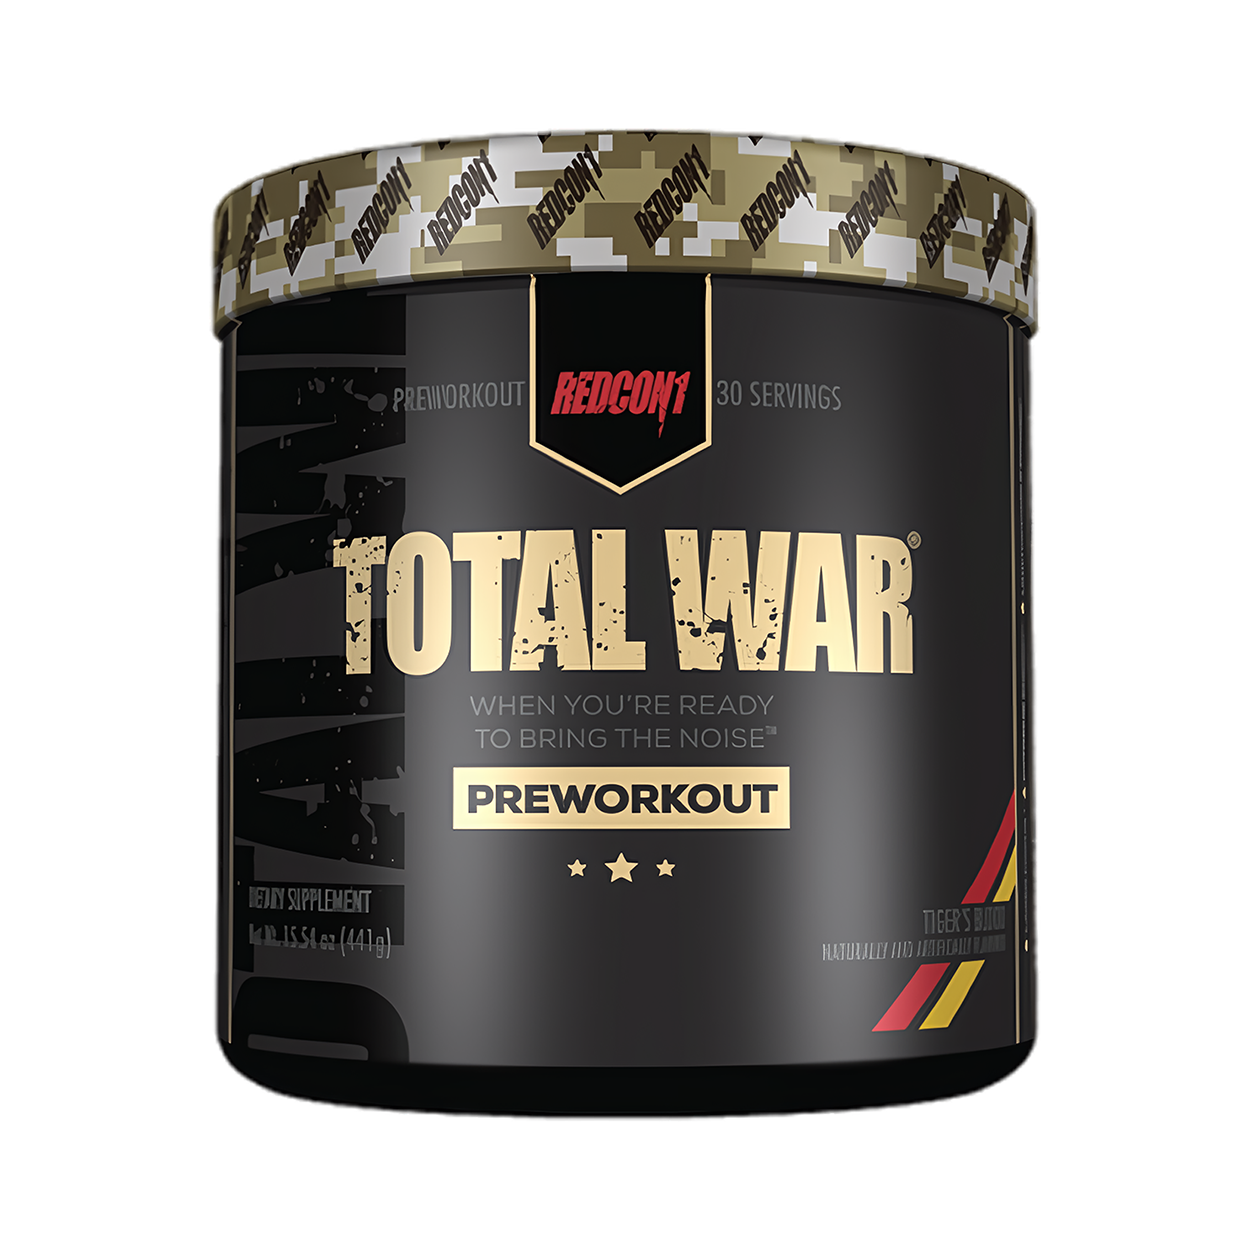 Redcon1 Total War Pre-Workout - A1 Supplements Store